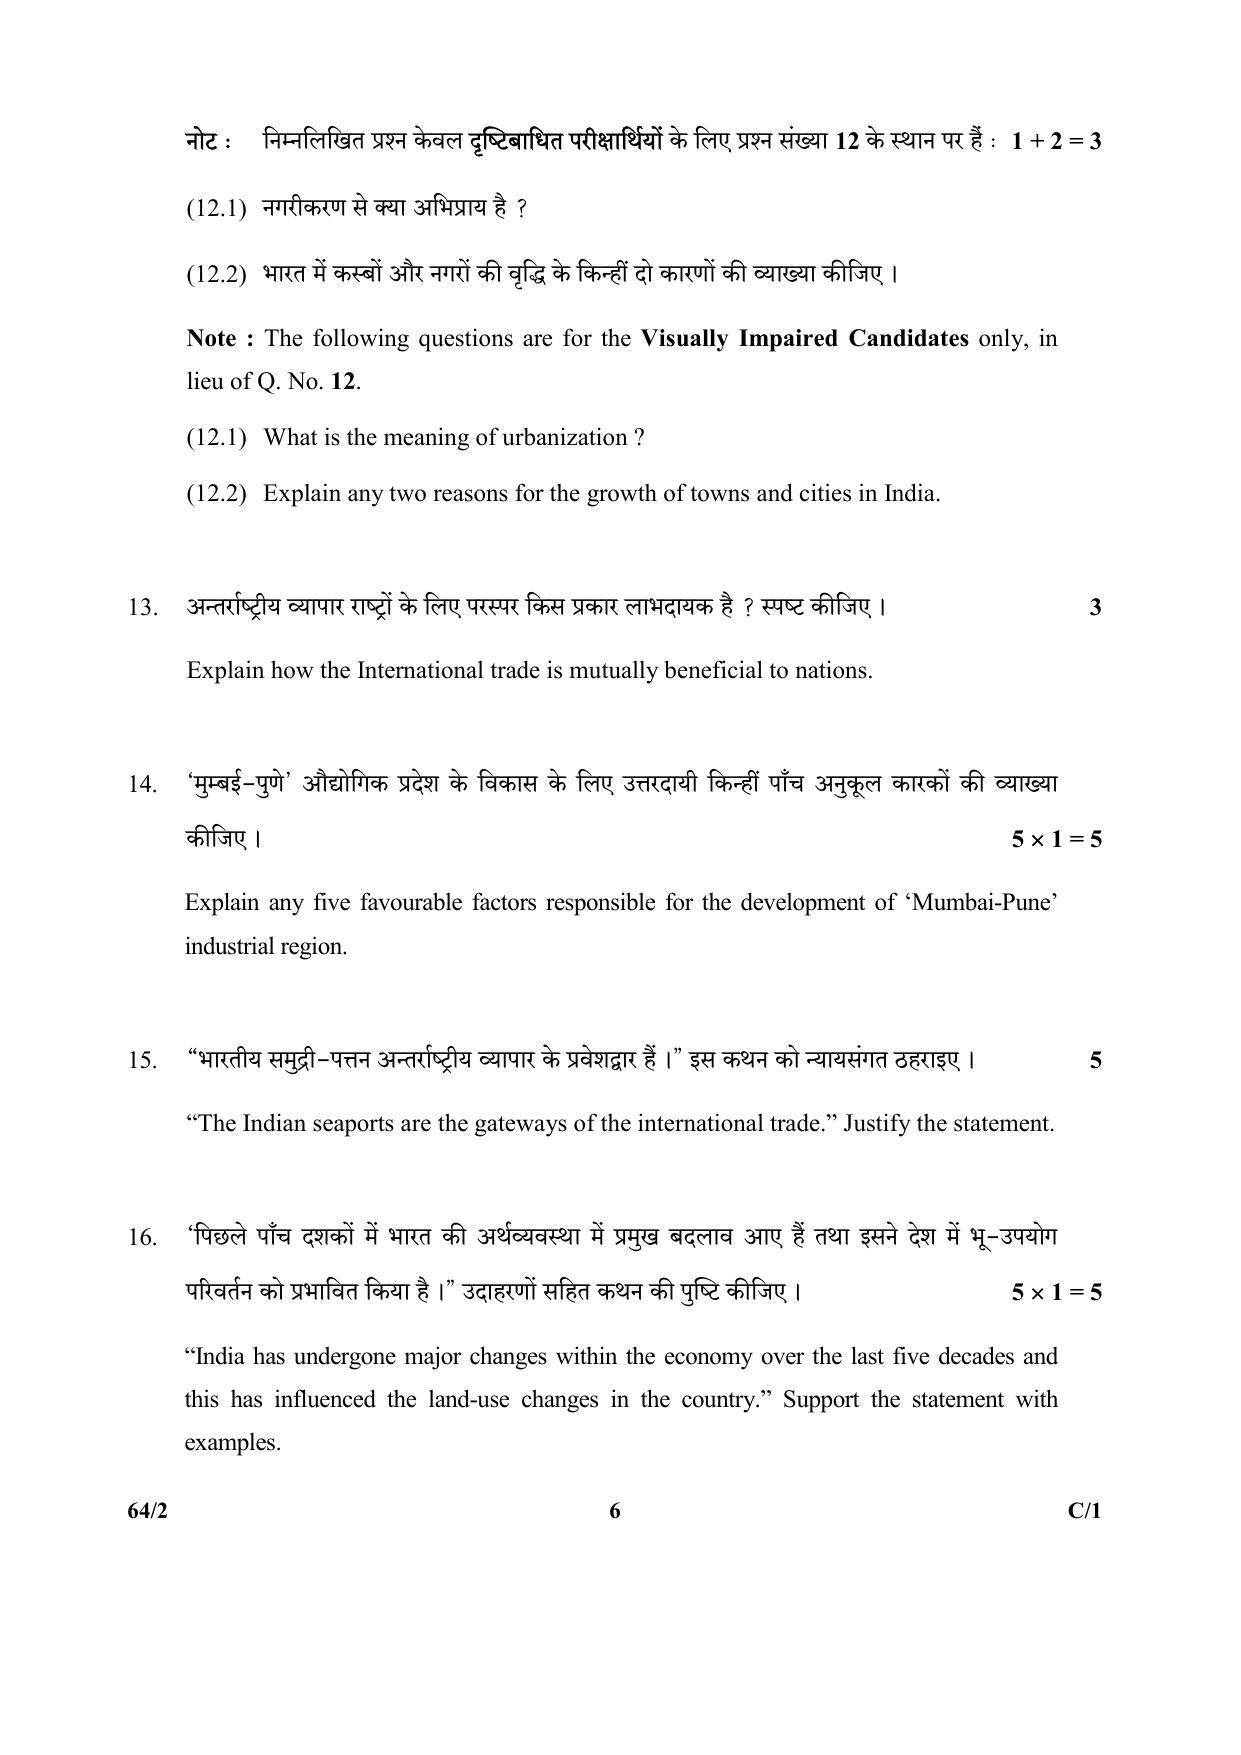 CBSE Class 12 64-2 (Geography) 2018 Compartment Question Paper - Page 6